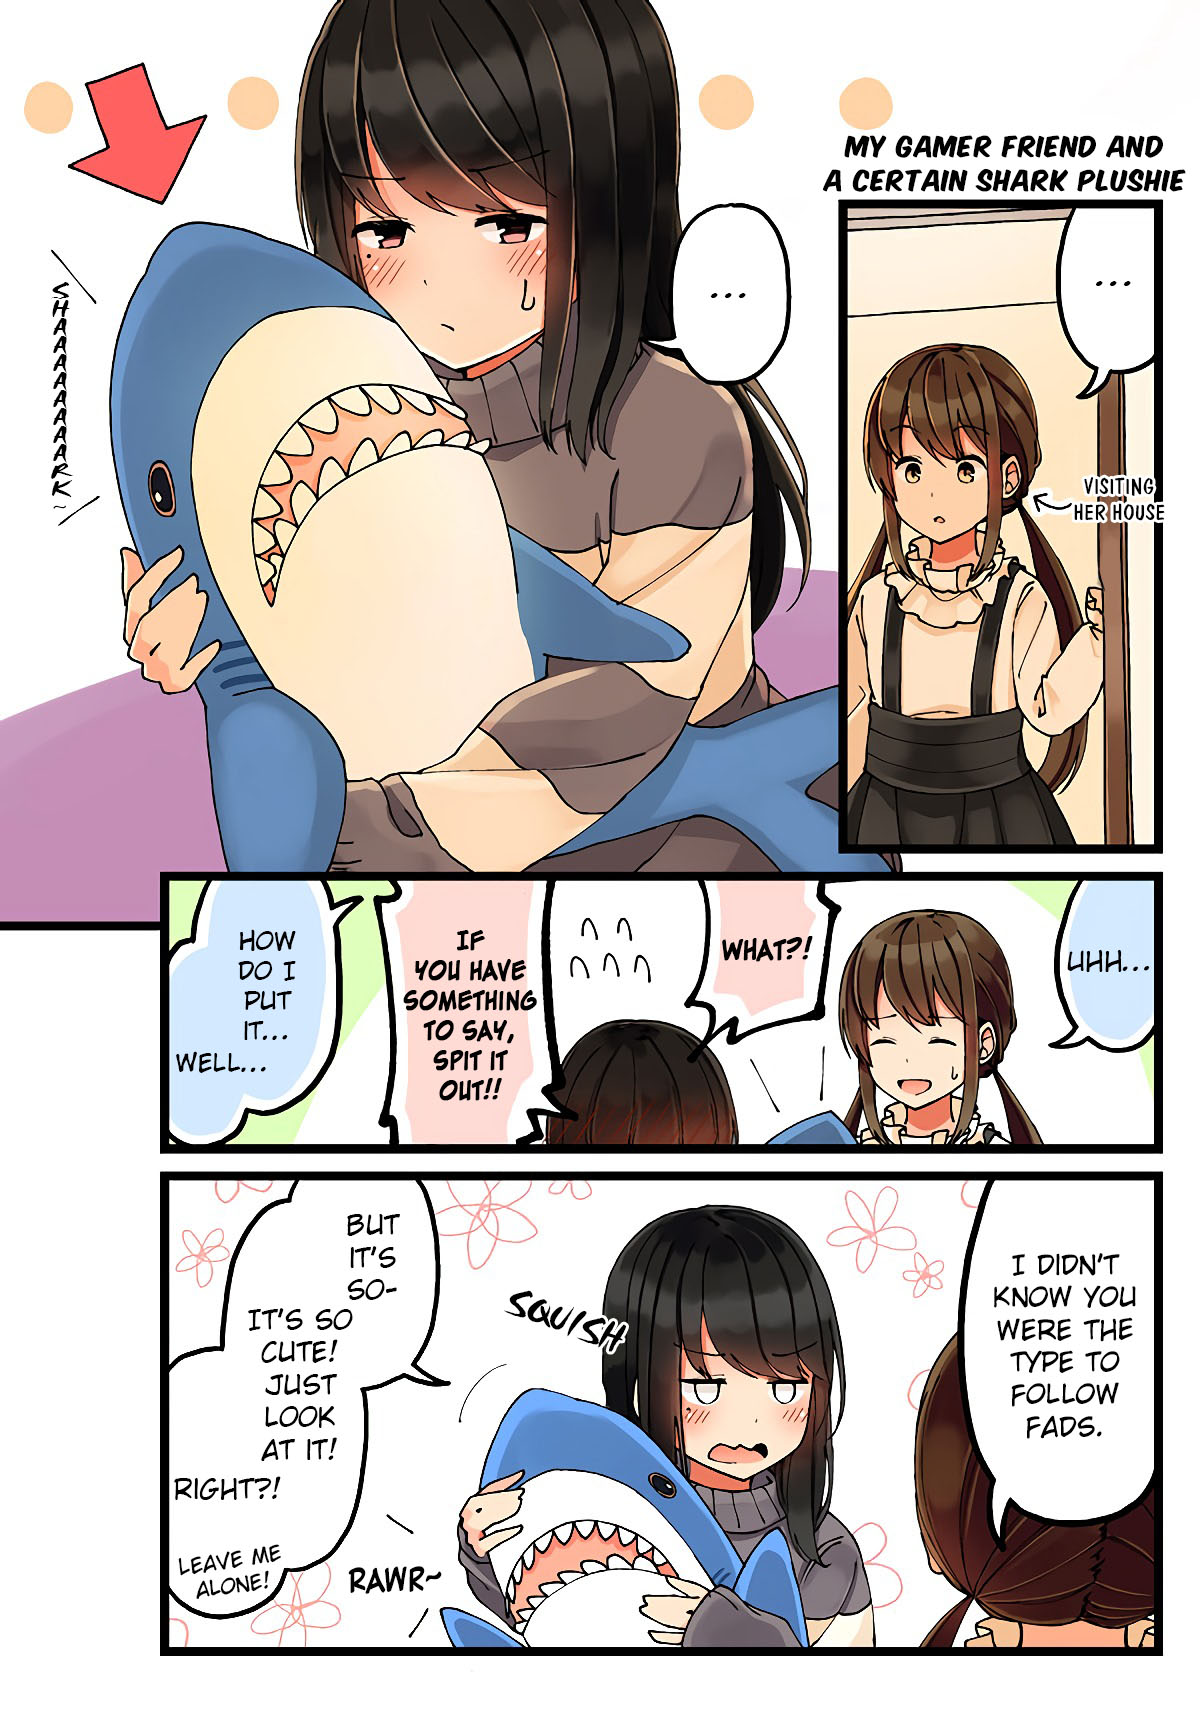 Hanging Out with a Gamer Girl Ch. 14 My Gamer Friend and a certain shark plushie